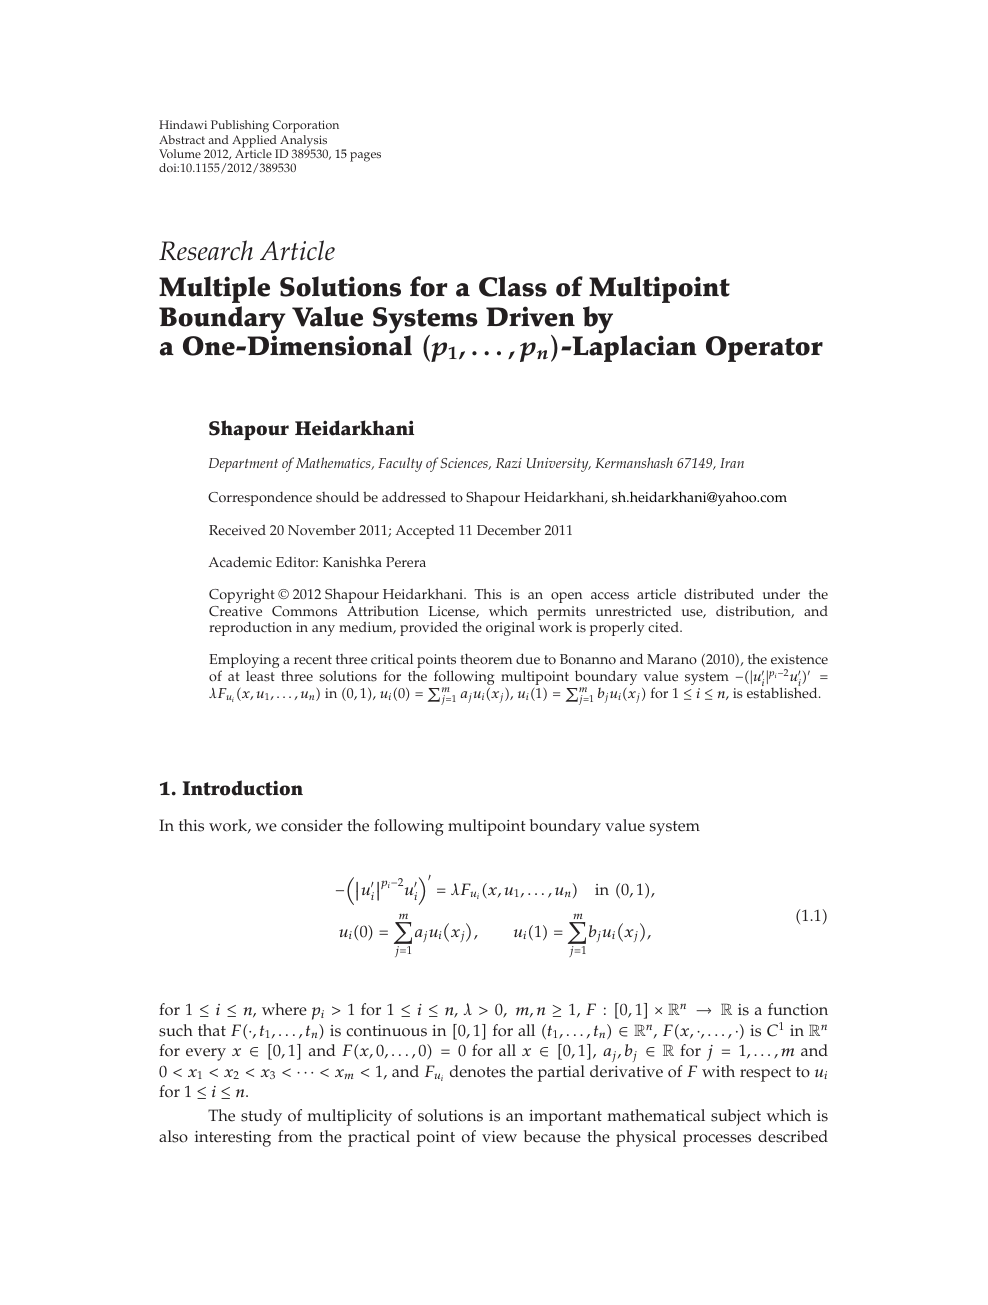 Multiple Solutions For A Class Of Multipoint Boundary Value Systems Driven By A One Dimensional 𝑝1 𝑝𝑛 Laplacian Operator Topic Of Research Paper In Mathematics Download Scholarly Article Pdf And Read For Free On